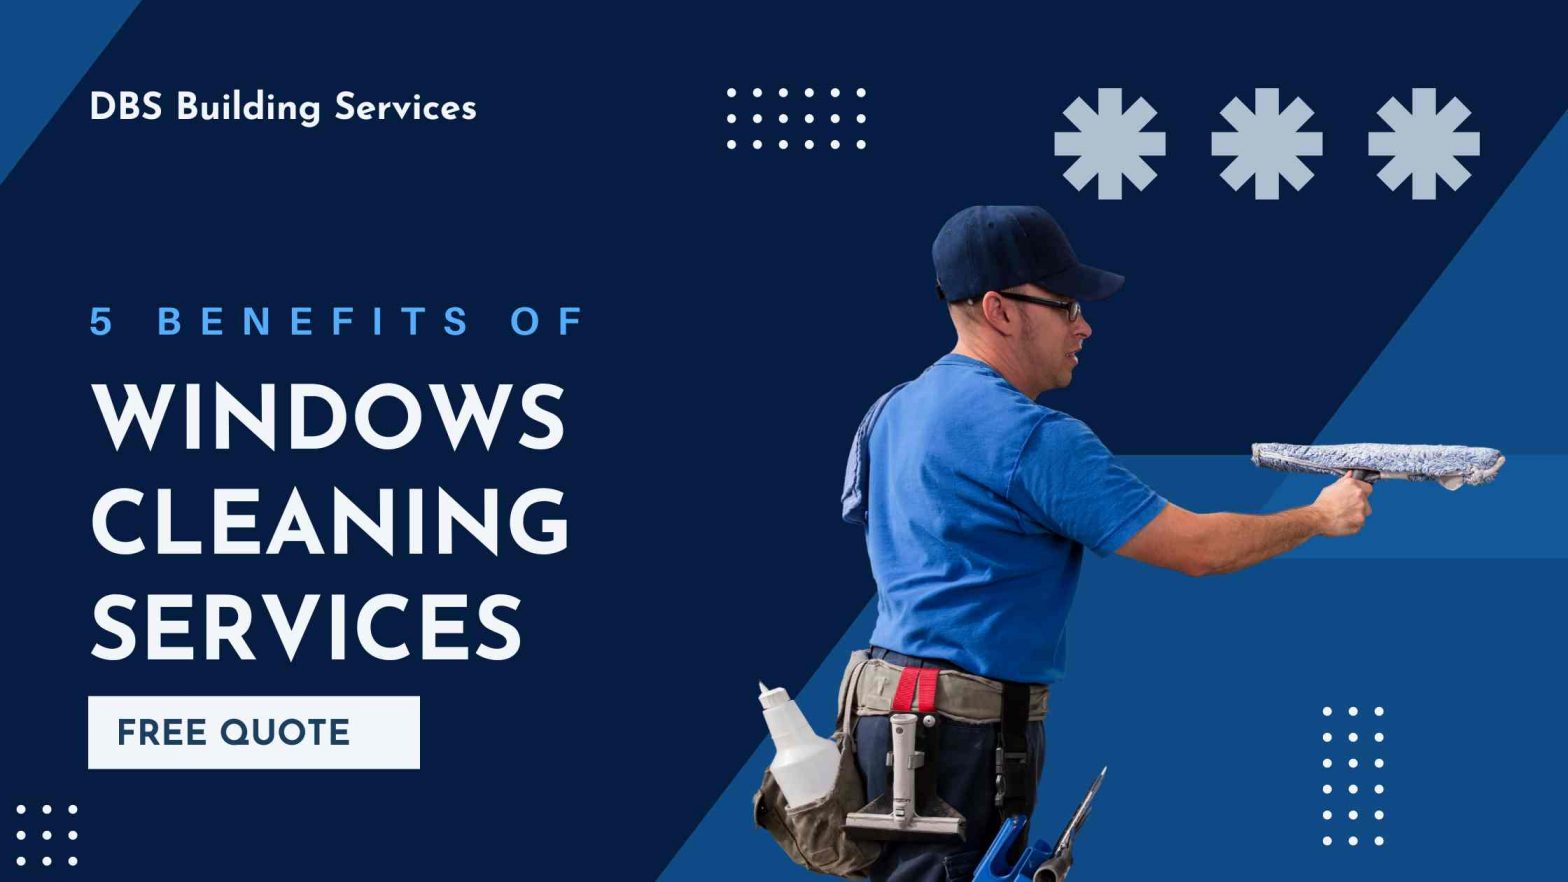 Windows Cleaning Services Benefits